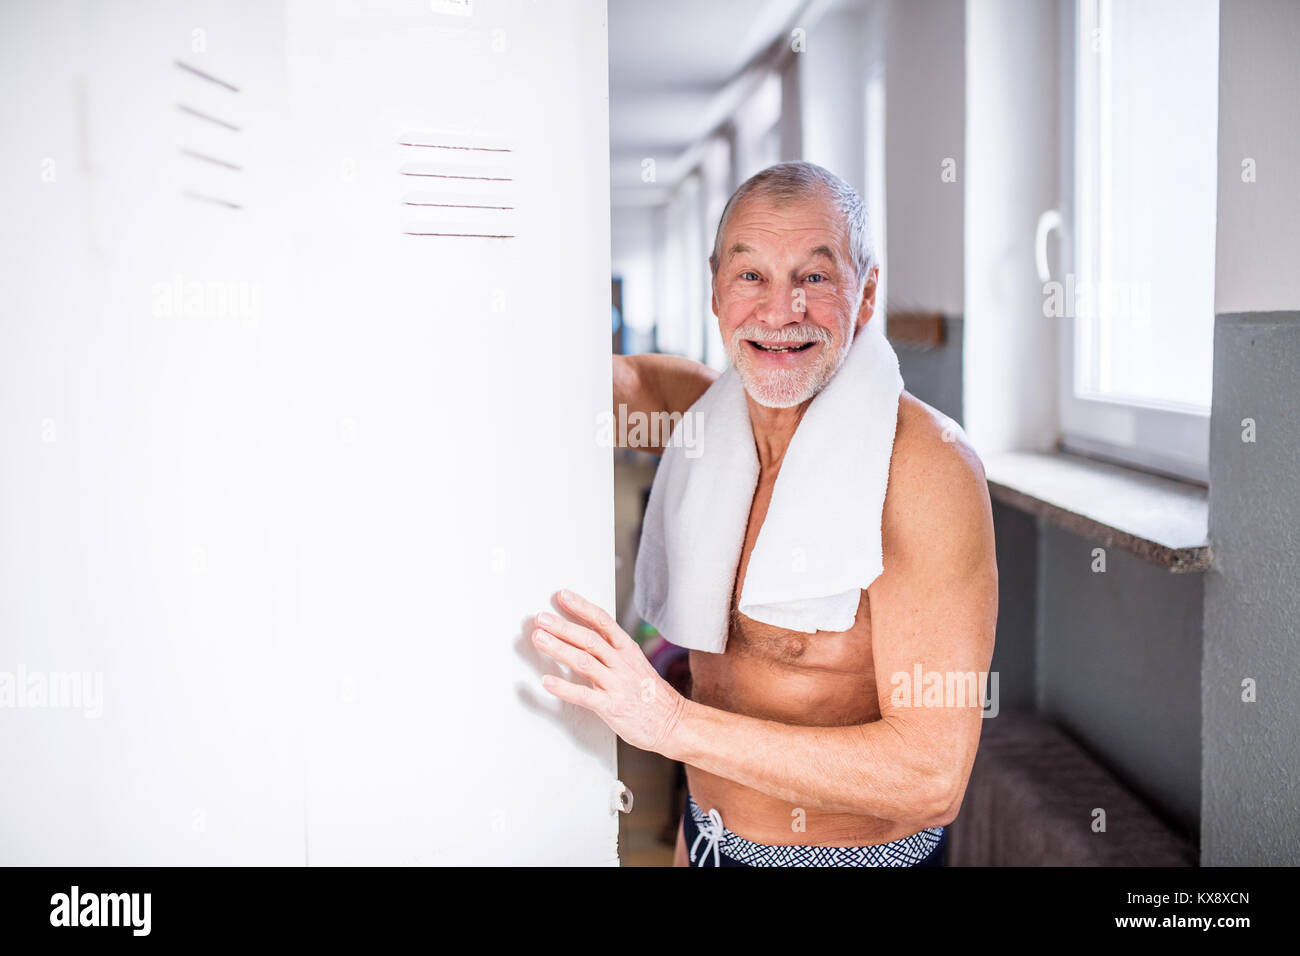 Senior man standing by the lockers in an indoor swimming pool. Stock Photo